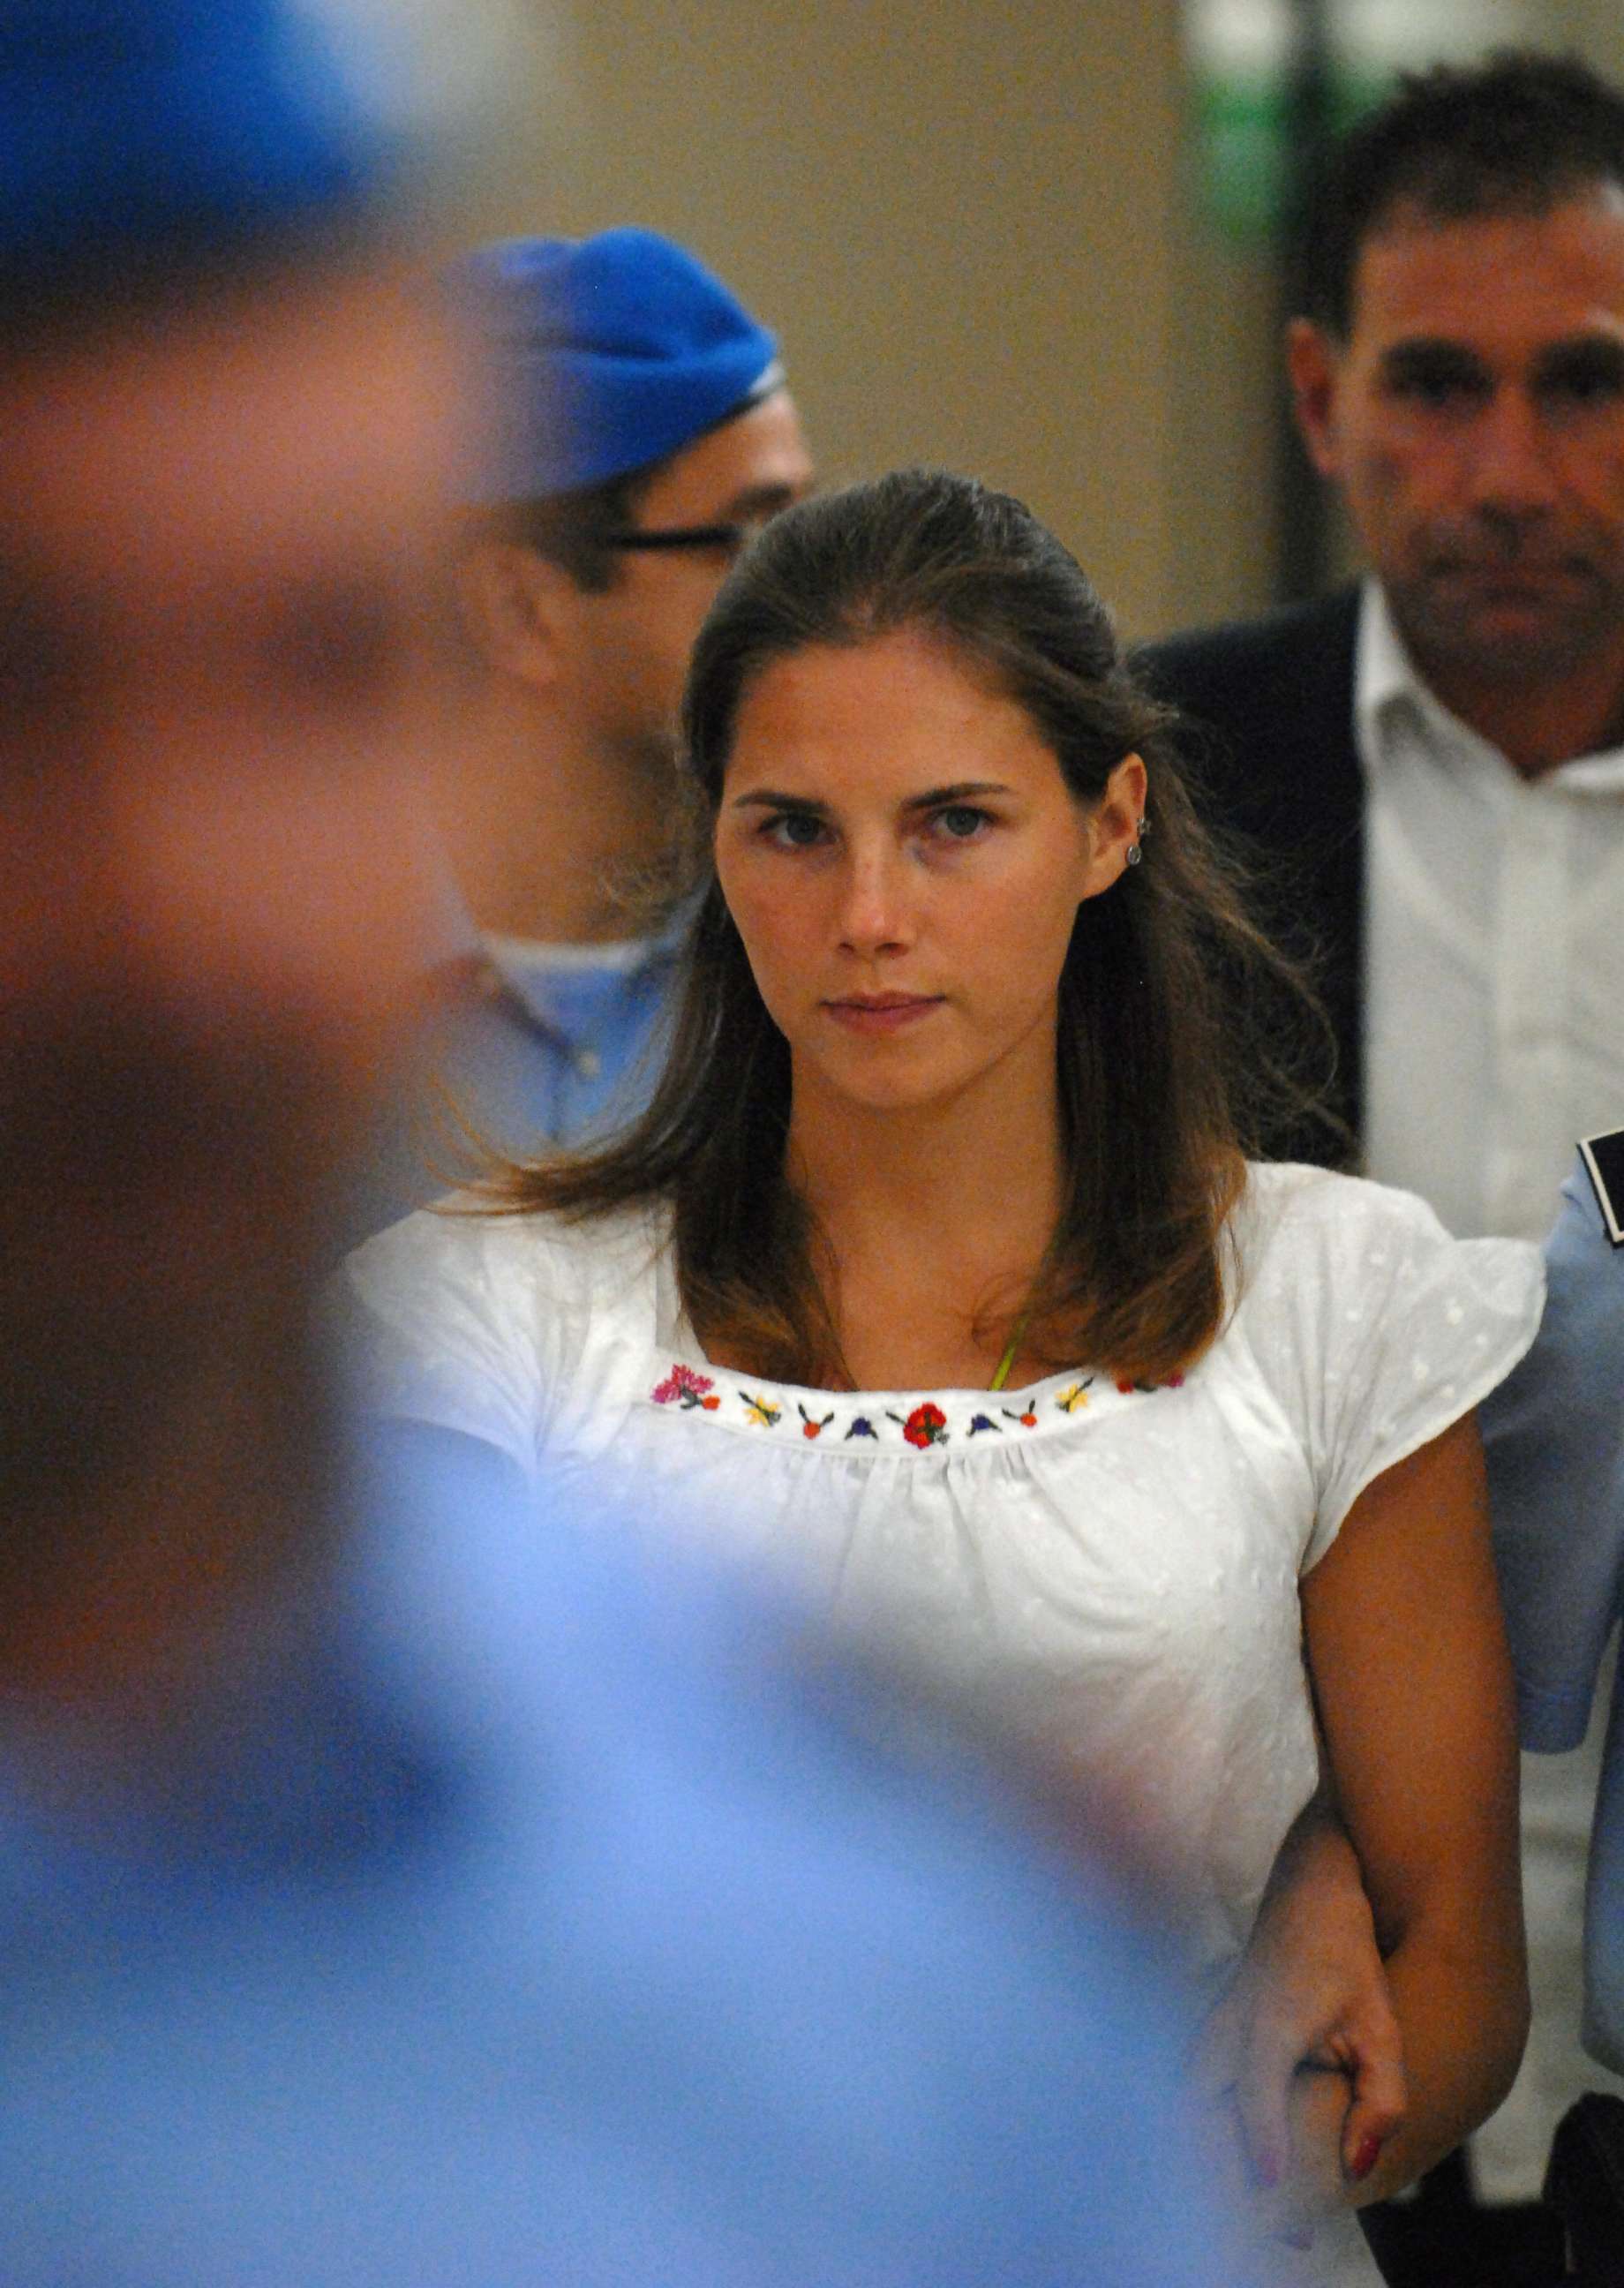 PHOTO: One of the three suspects in the murder of British student Meredith Kercher, Amanda Knox, is escorted by police upon her arrival at a court hearing in Perugia, Italy, Sept. 16, 2008. 